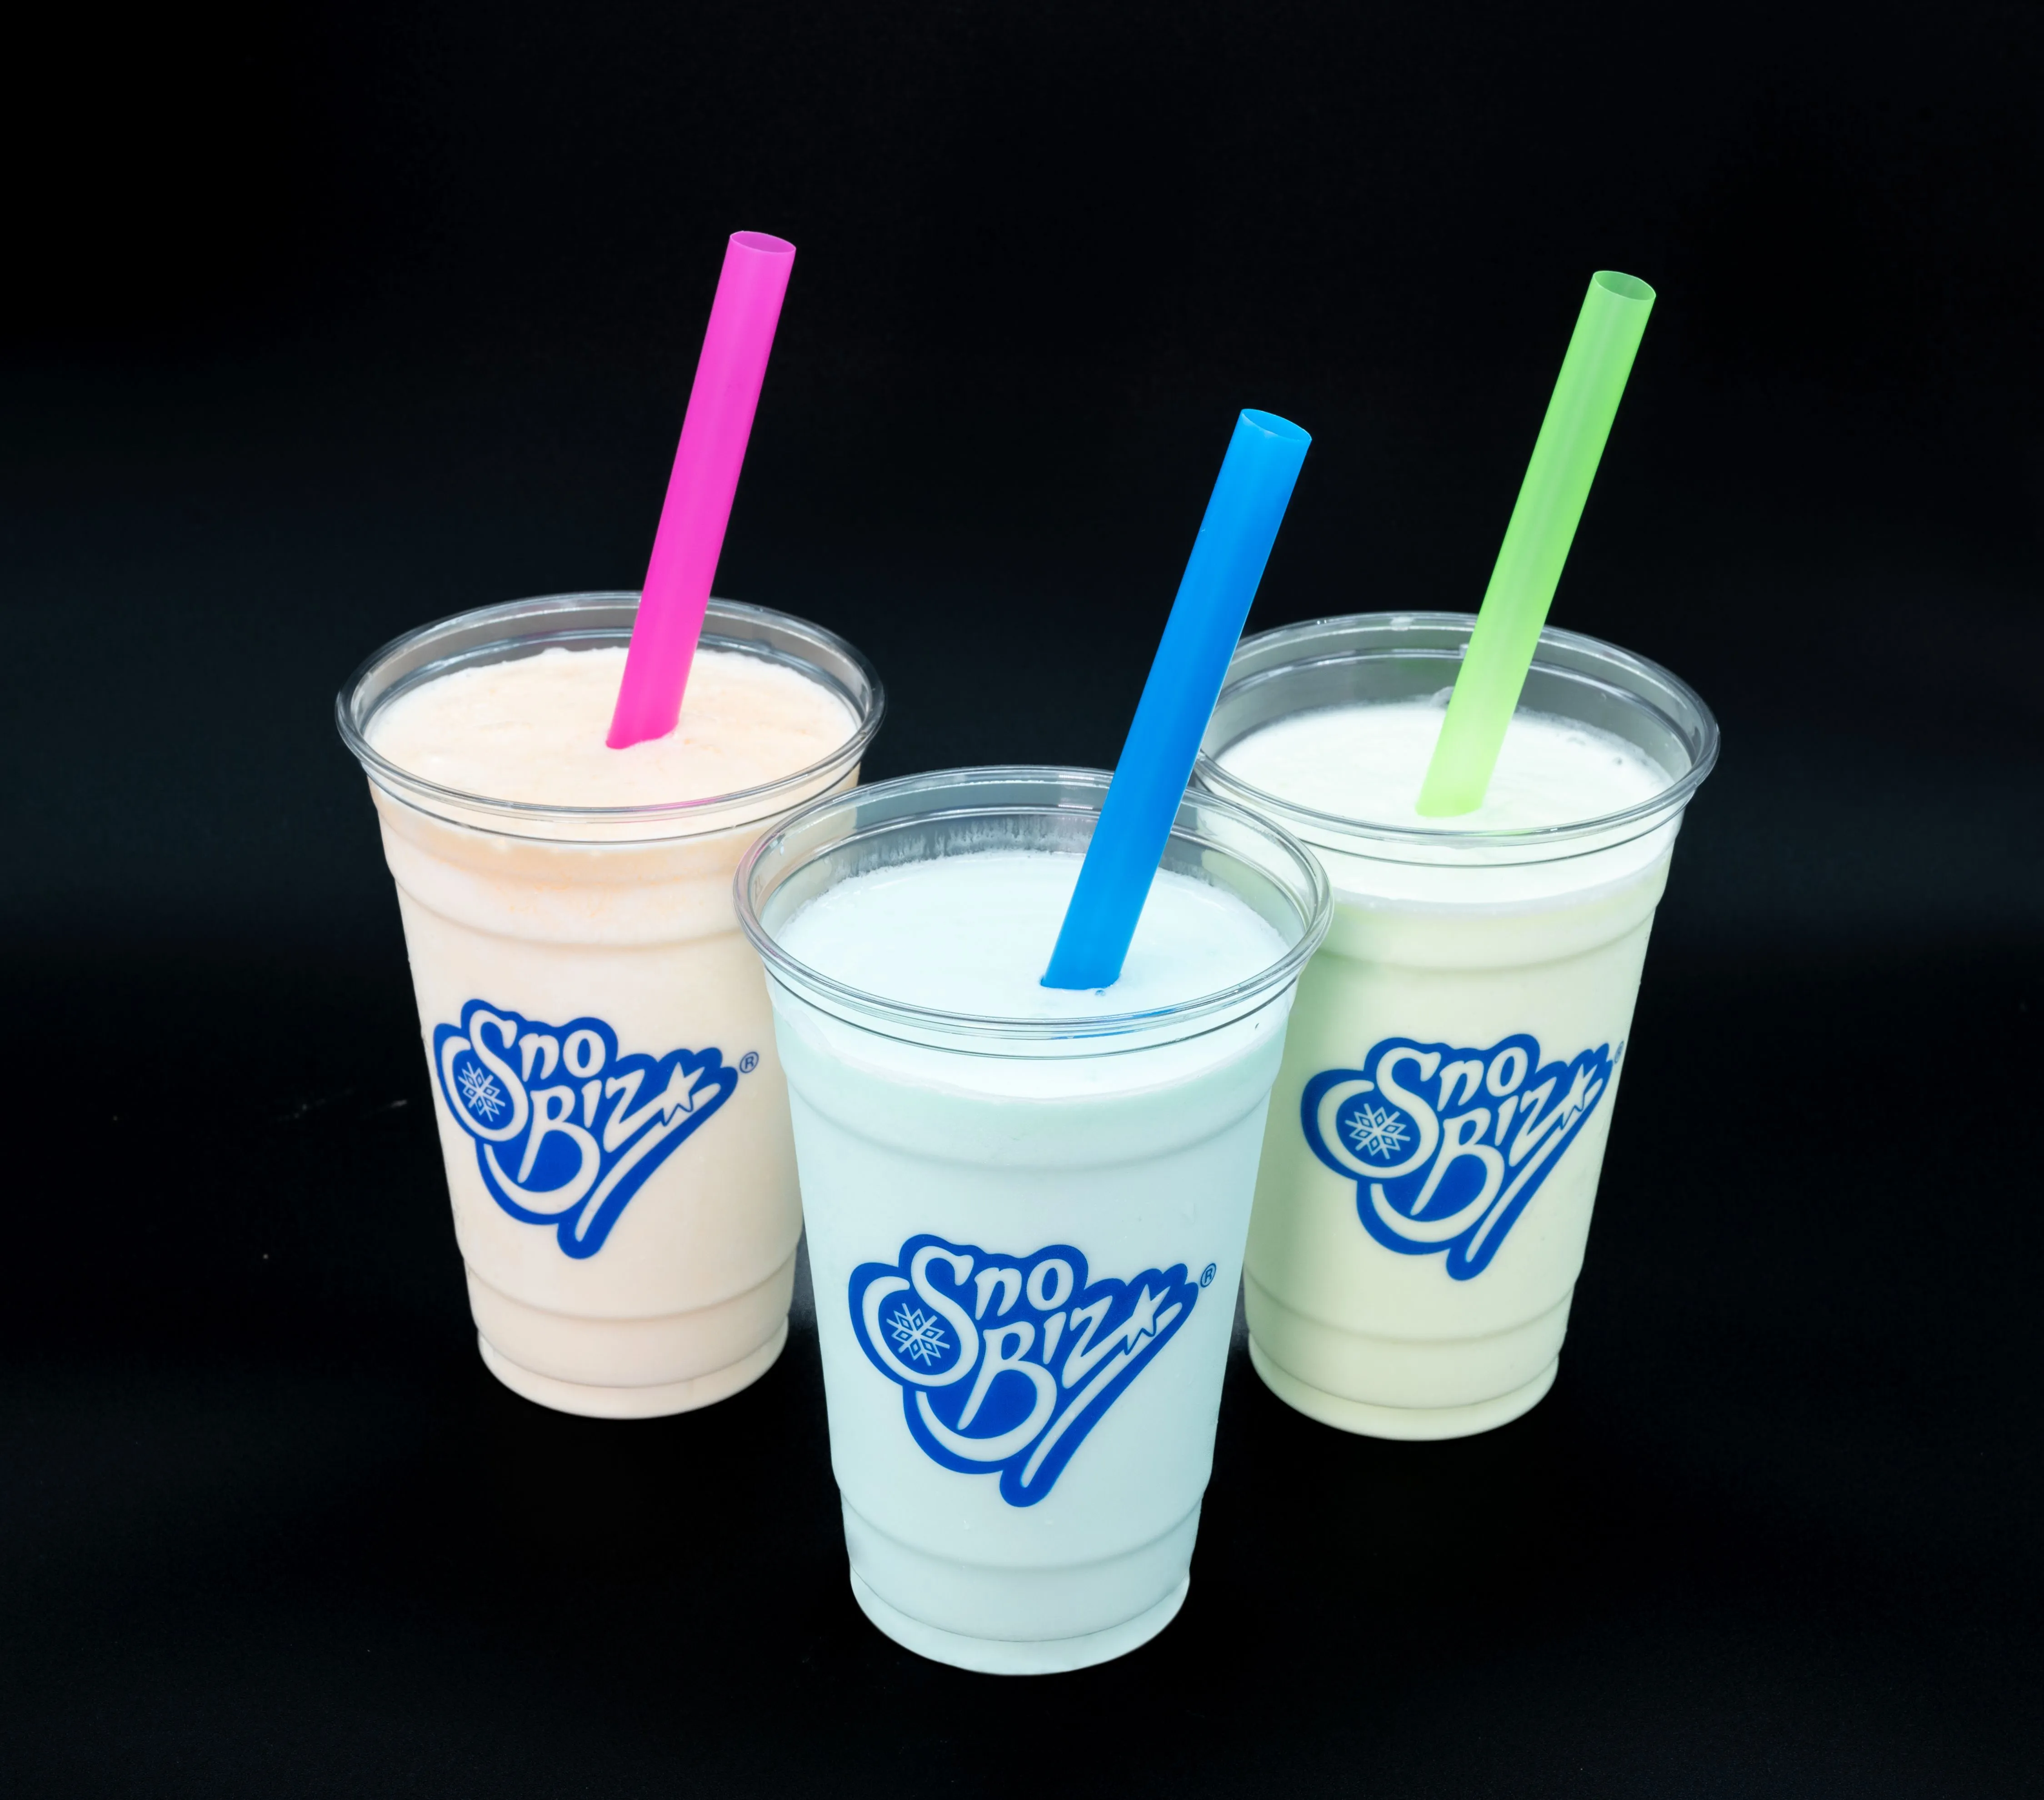 Three Sno Biz branded milkshake cups with pink, blue, and green straws against a black background.